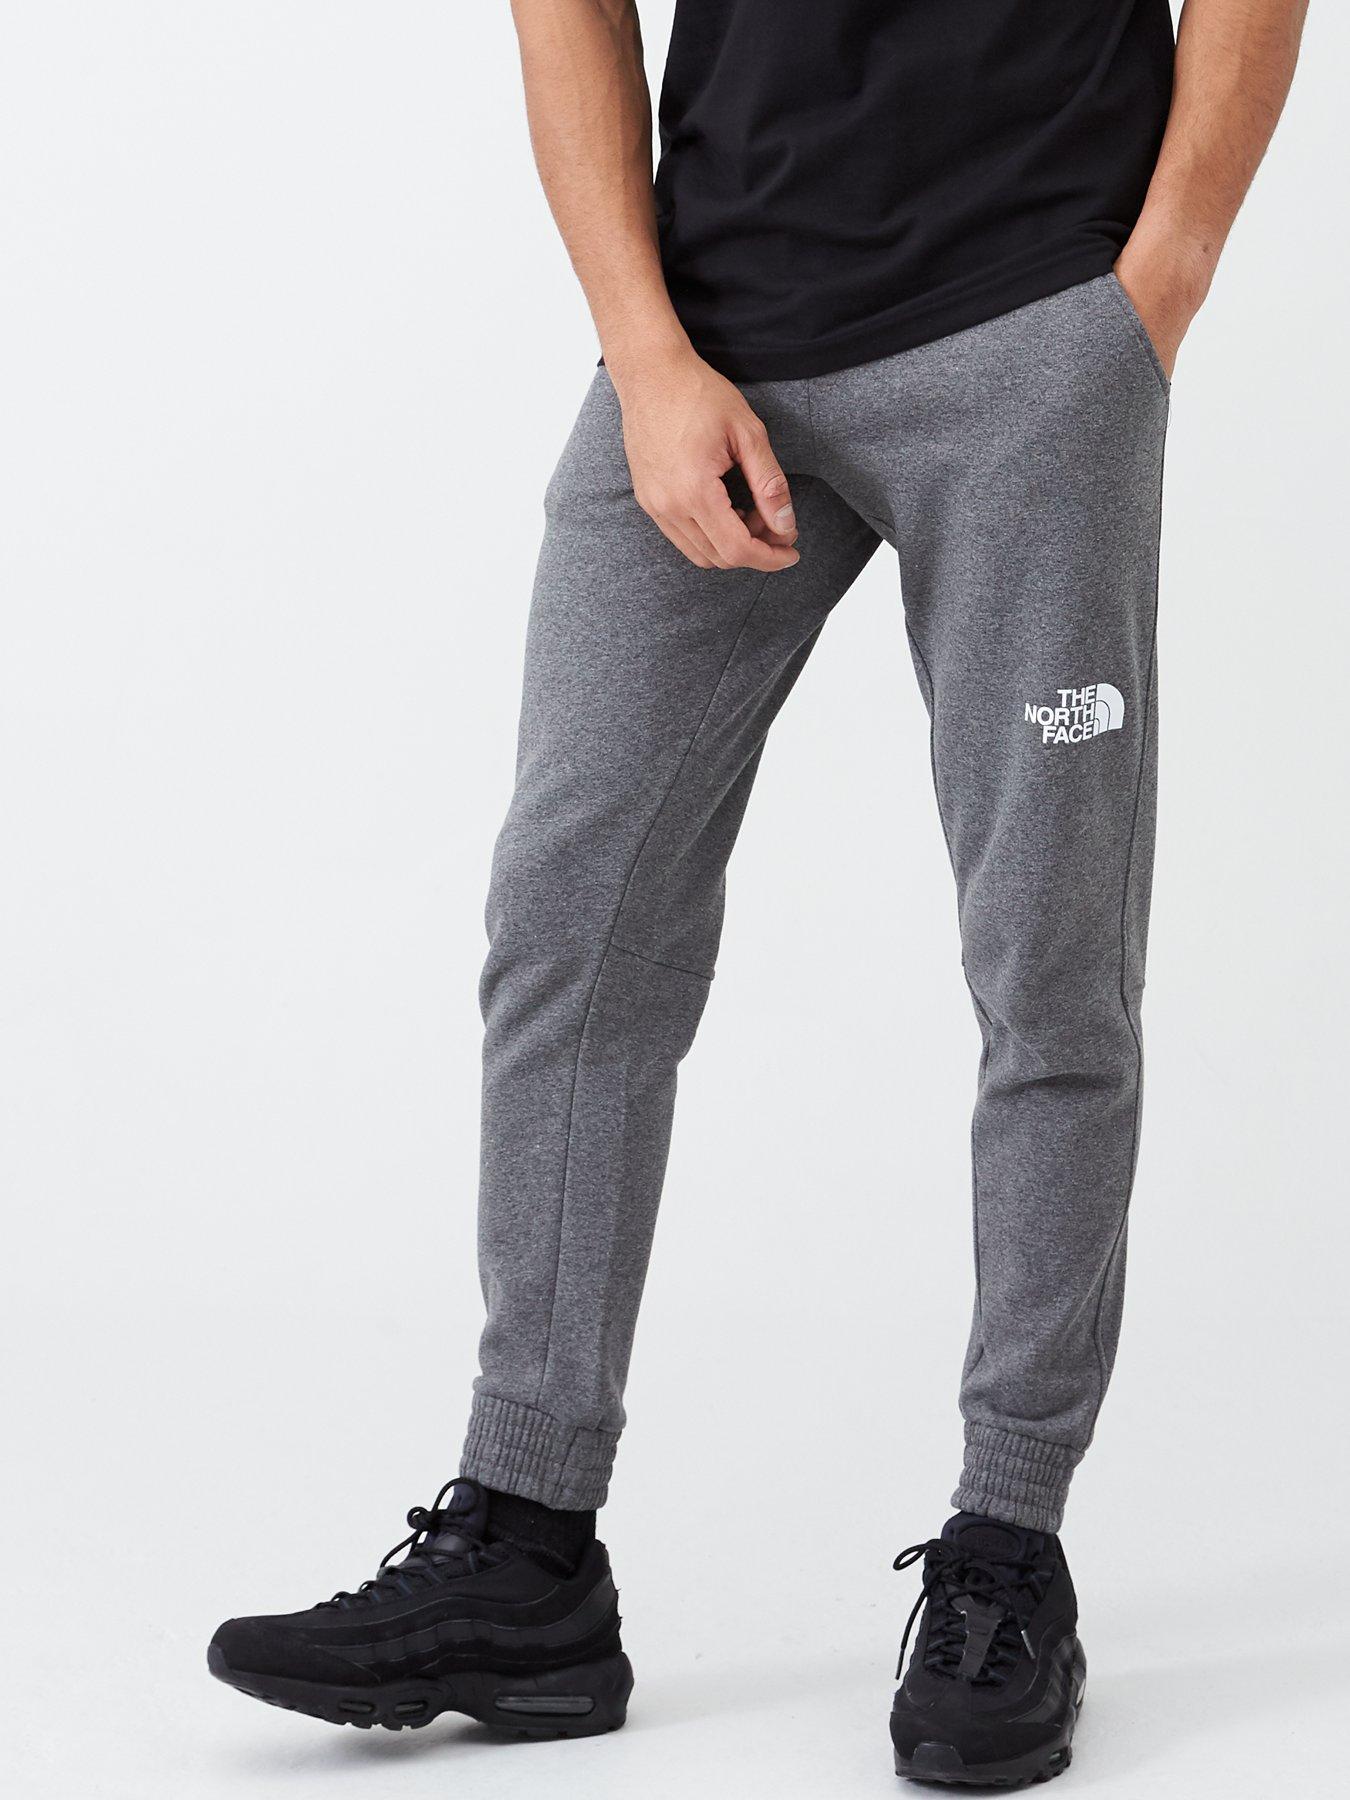 north face mens bottoms